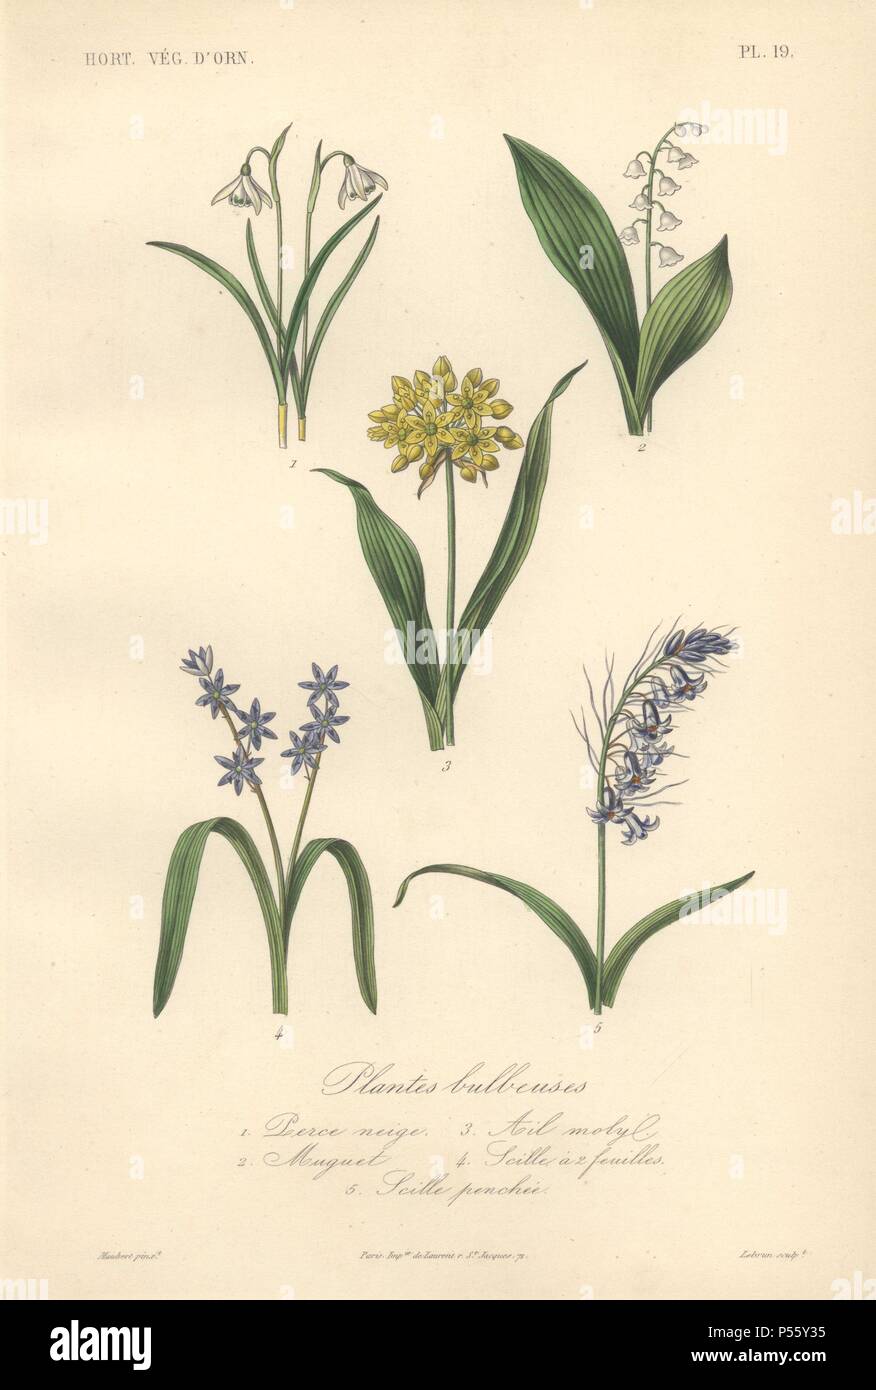 Five bulbous plants including snowdrop (Galanthus nivalis), lily of the valley (Convallaria majalis), yellow allium (Allium flavum), blue alpine squill (Scilla bifolia) and common bluebell (Hyacinthoides non-scripta). . . Plantes Bulbeuses, 1) Perce Neige 2) Muguet 3) Ail Molby 4) Scille a deux Feuilles 5) Scille Penchee . . Handcolored lithograph drawn by Edouard Maubert from Herincq's 'Le Regne Vegetal' 1865. Stock Photo